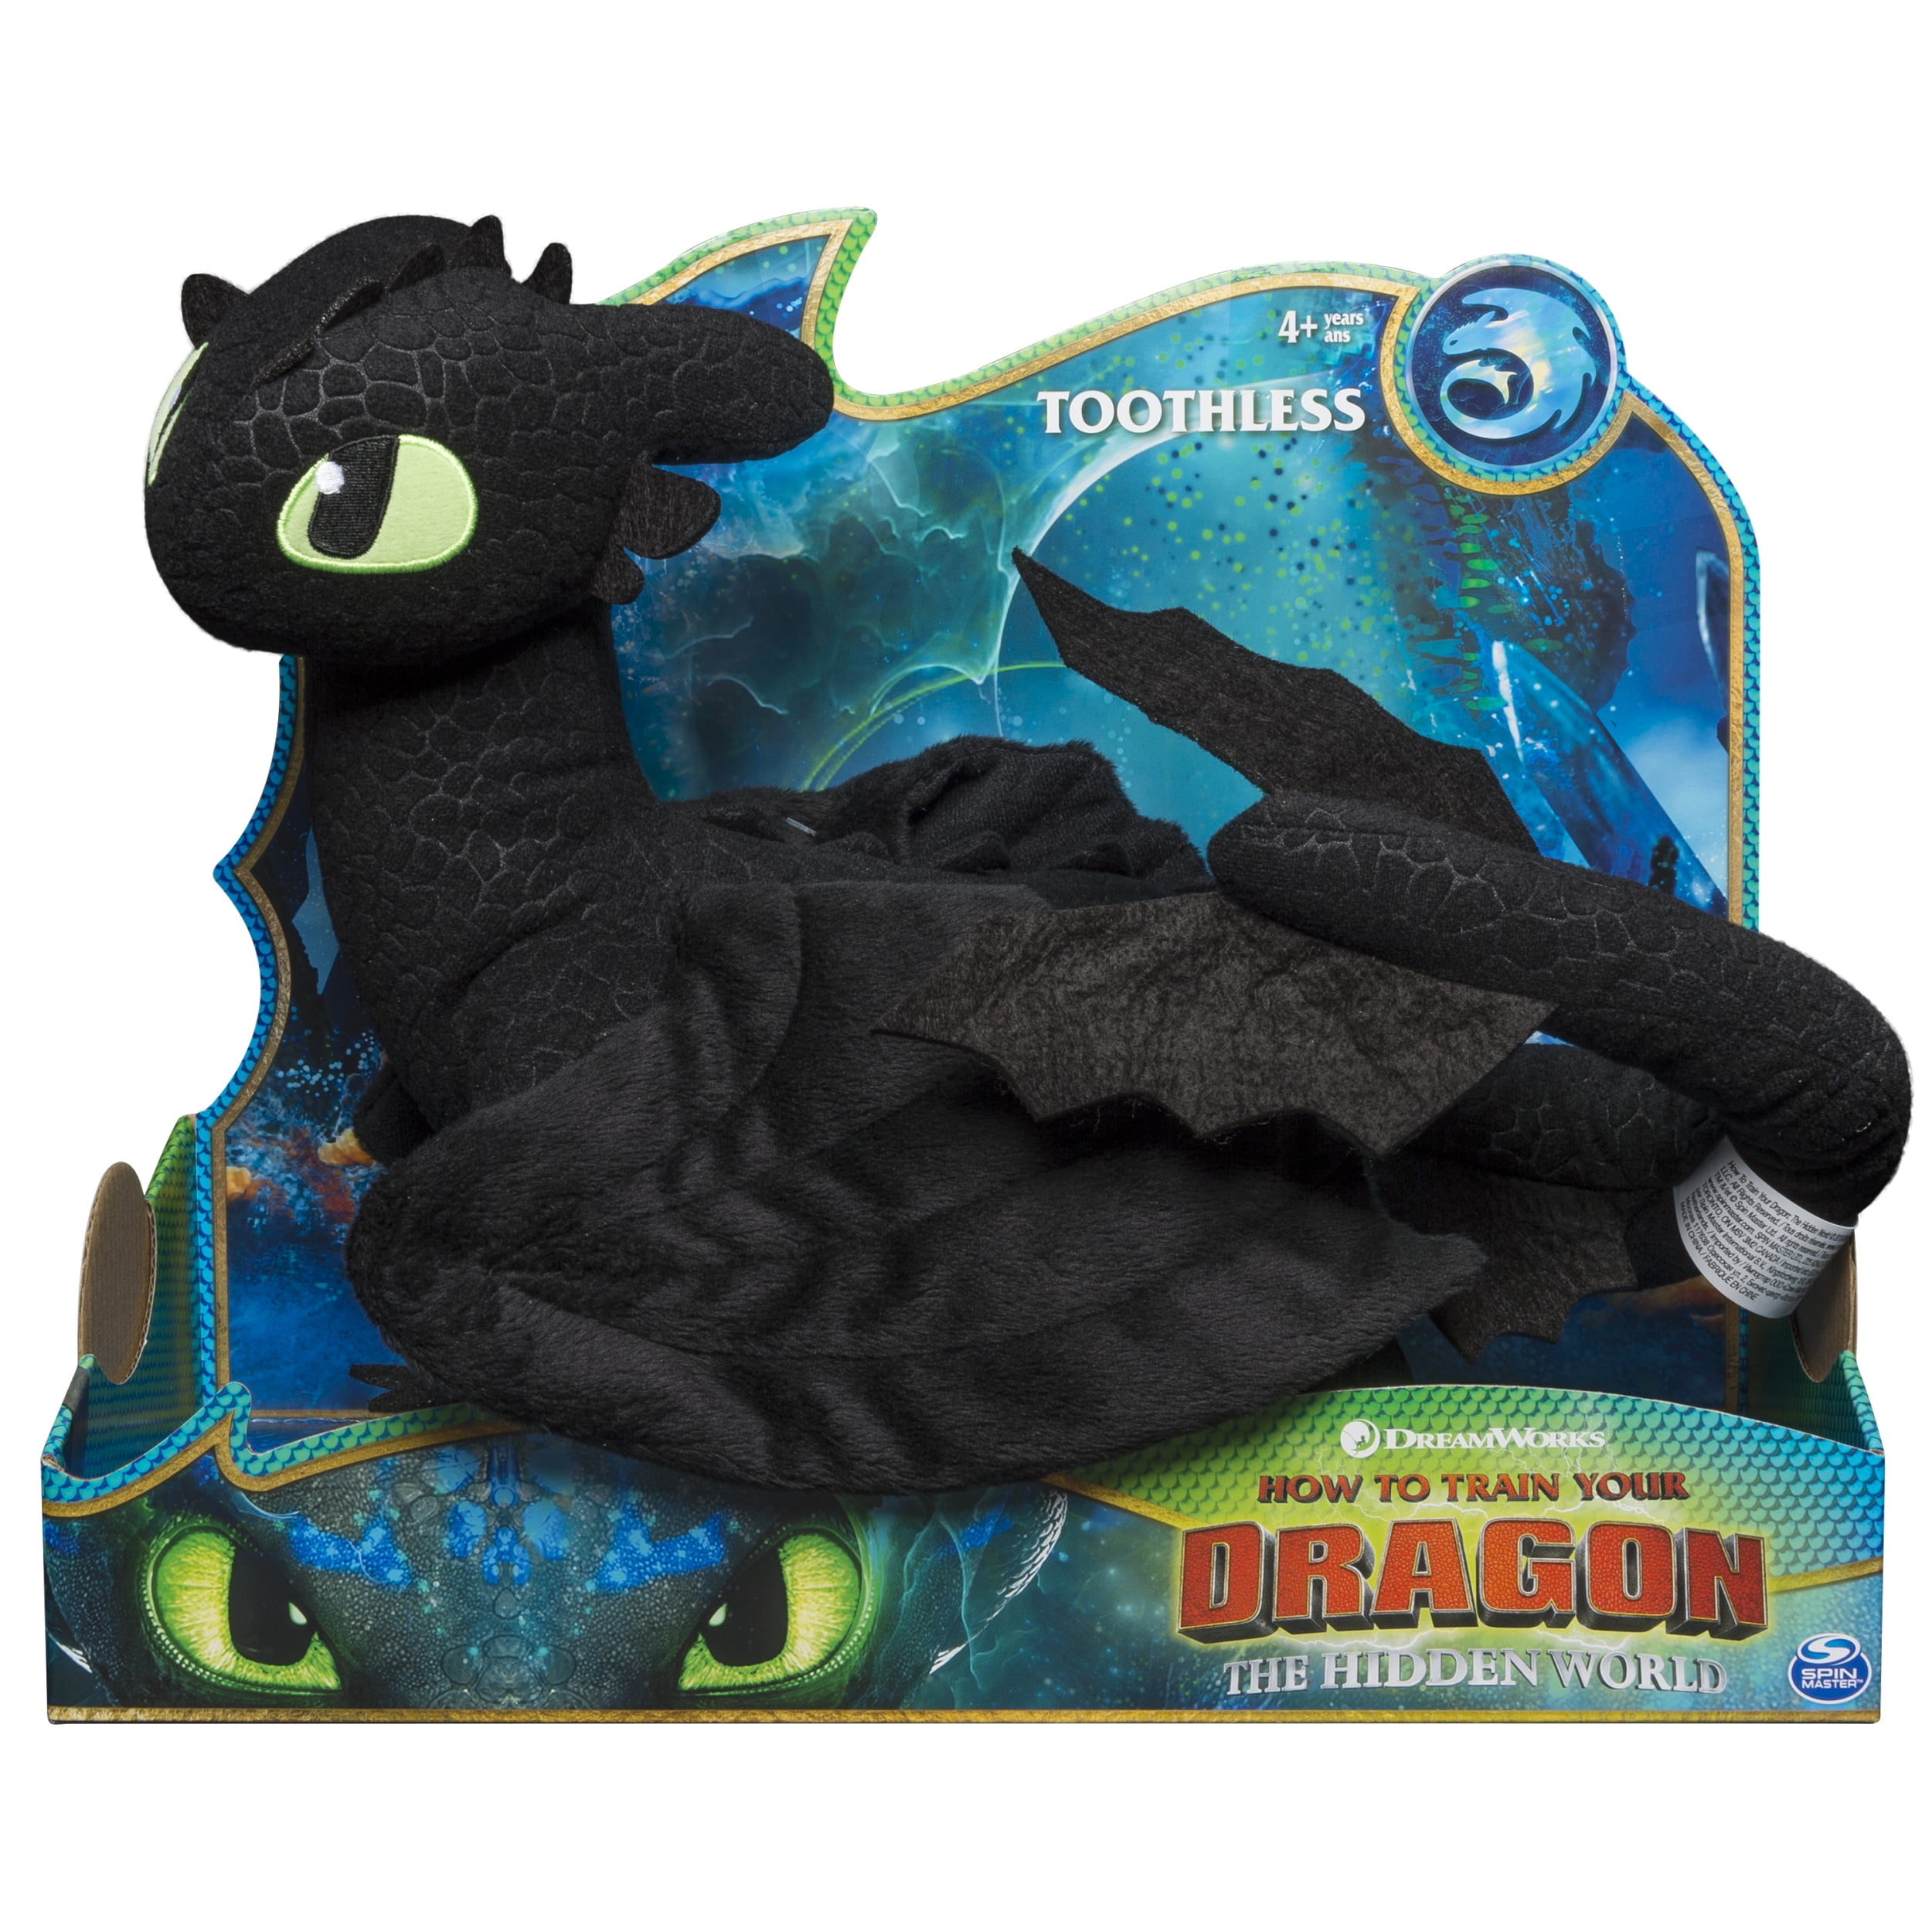 DreamWorks Dragons, Toothless 14-inch 